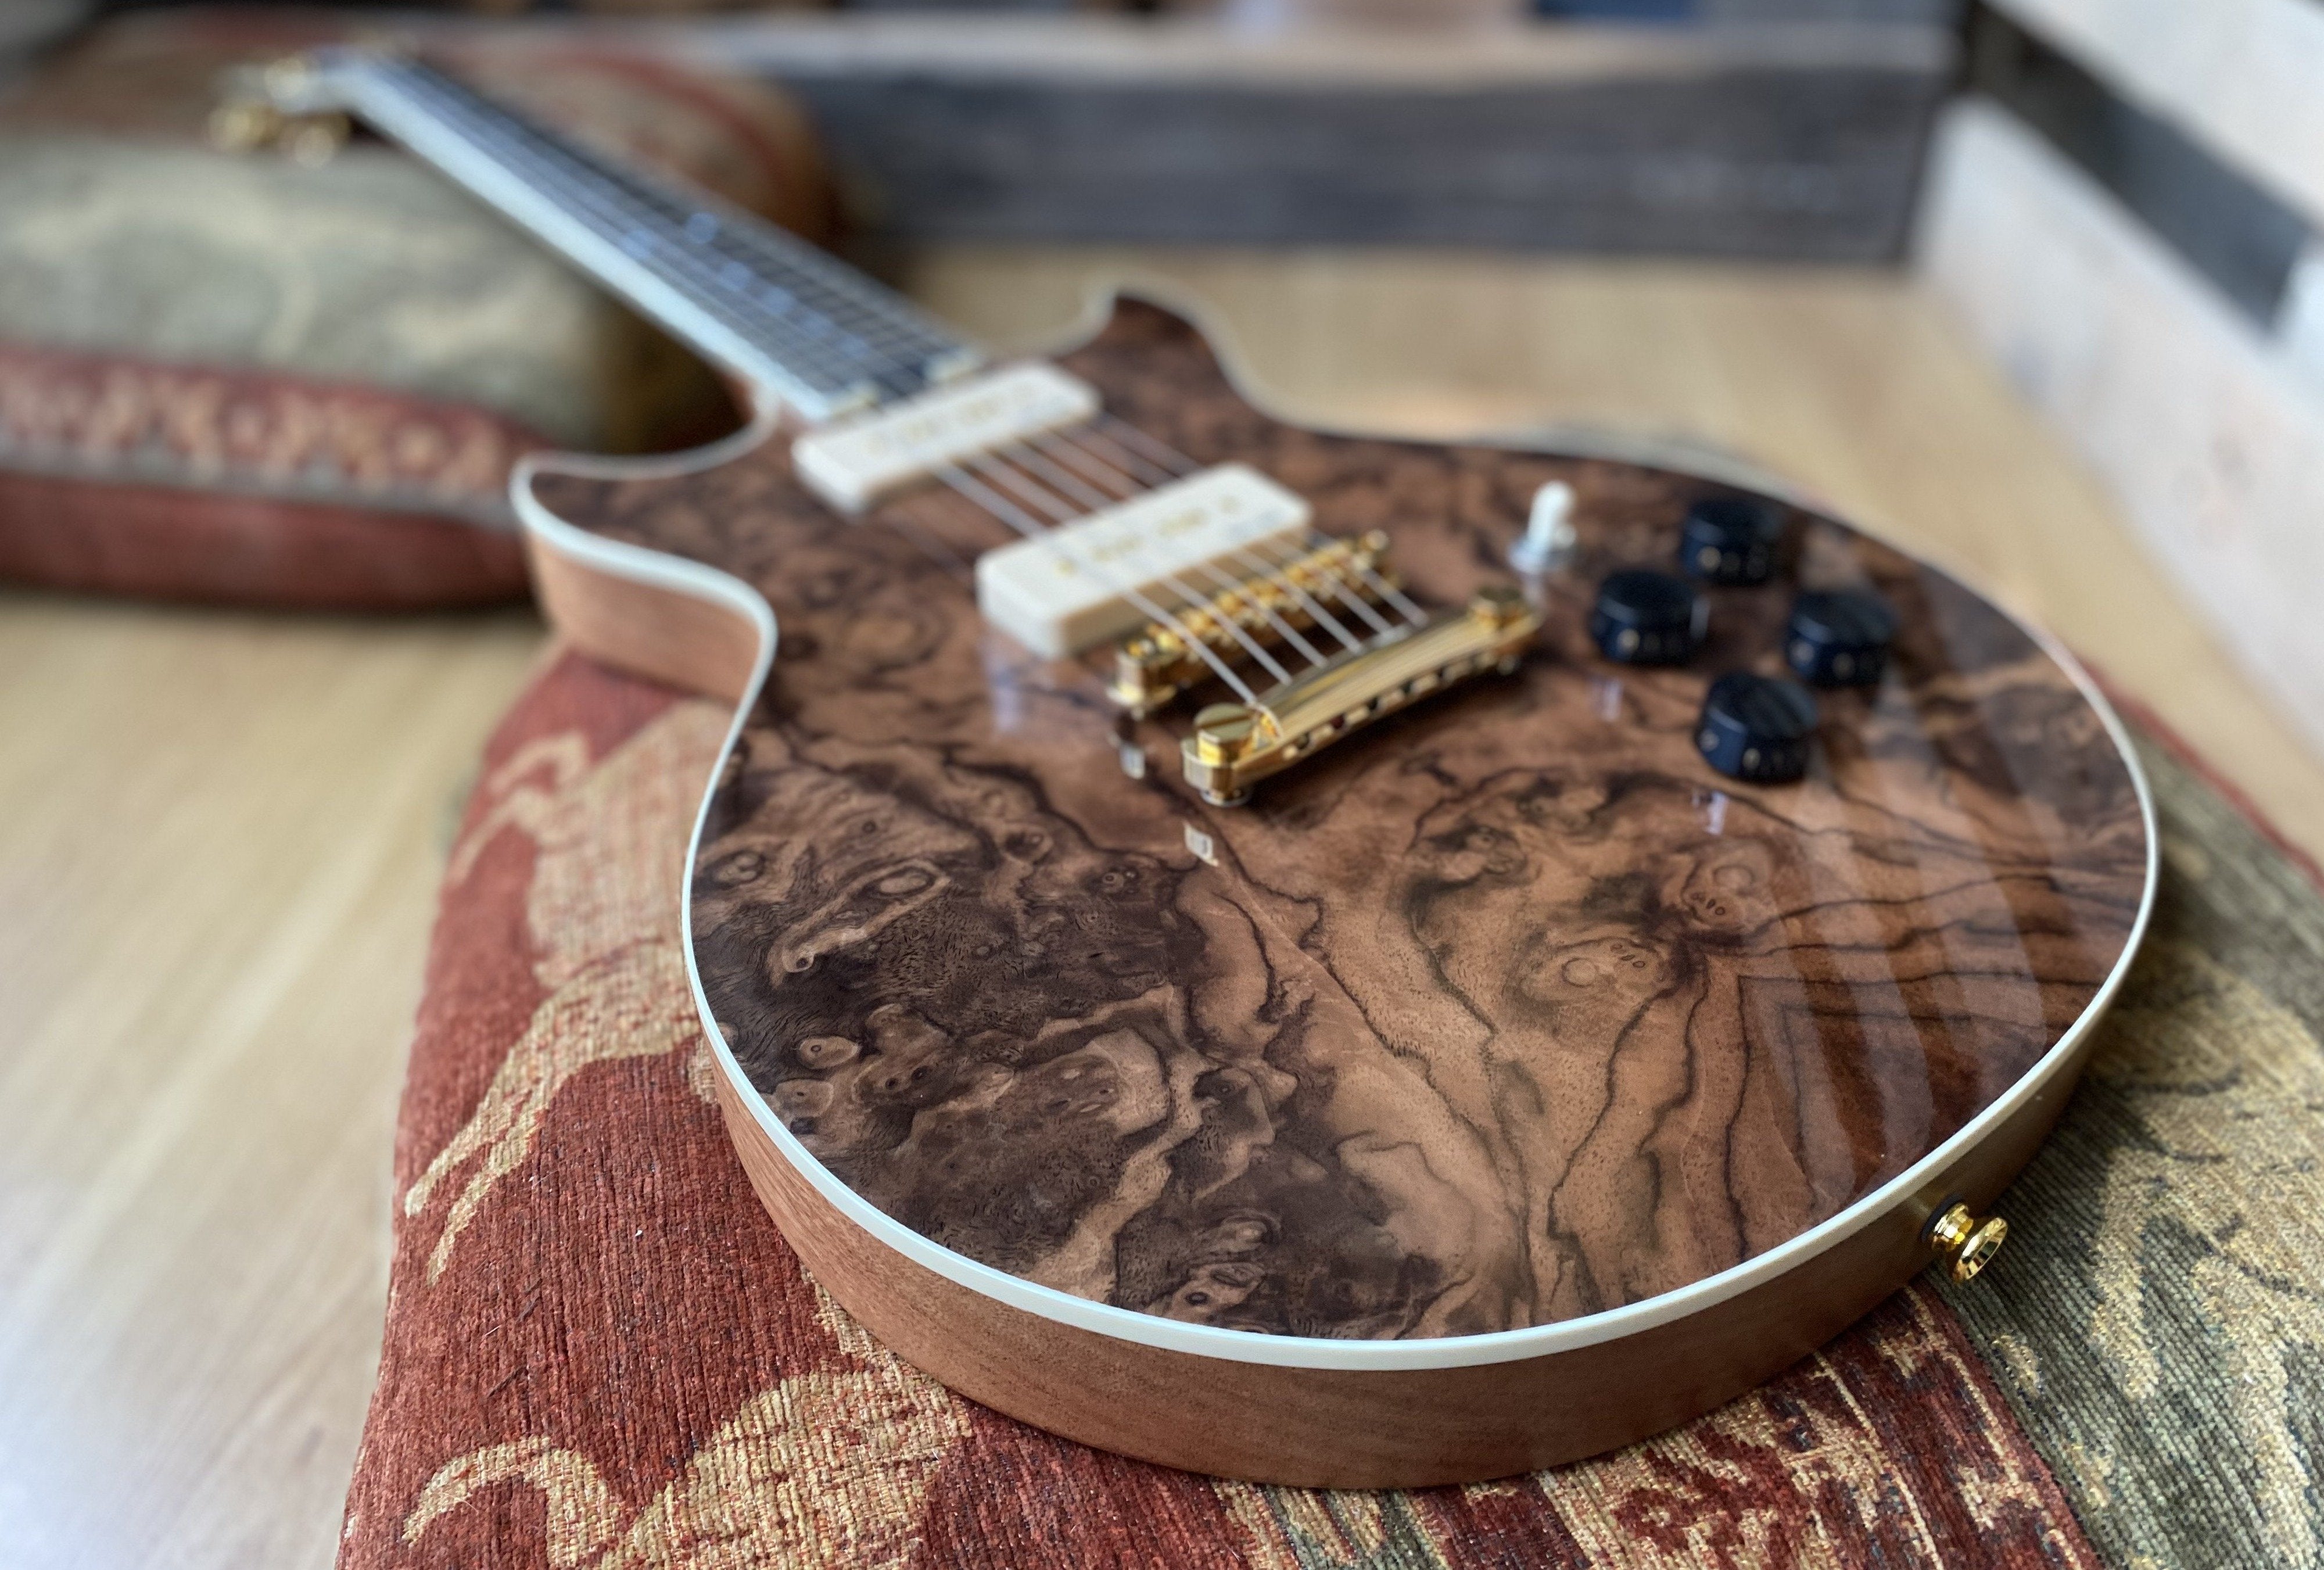 Gordon Smith GS Deluxe Burled Walnut P90 Custom, Electric Guitar for sale at Richards Guitars.